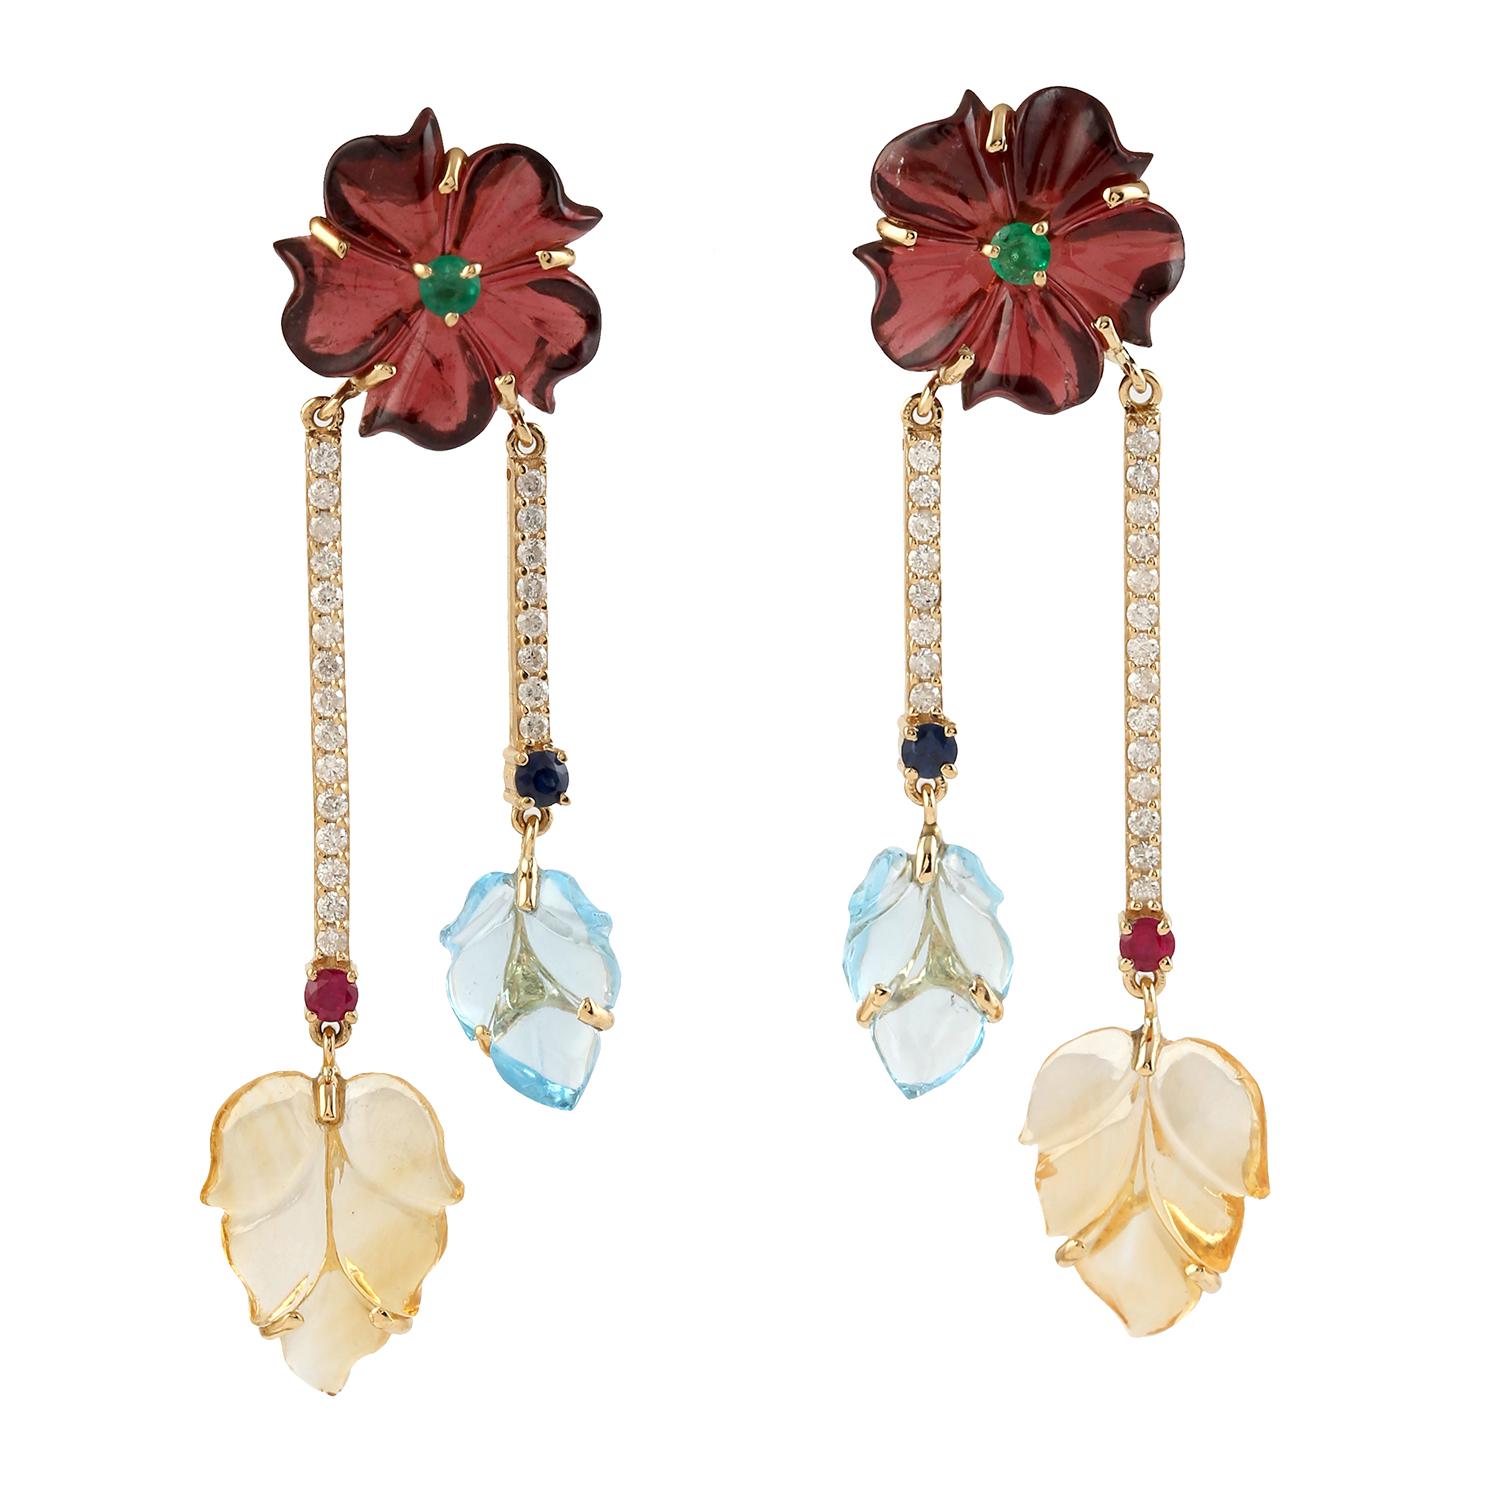 Cast in 14-karat gold. These beautiful earrings are set with 18.8 carats of carved multi gemstone, emerald, topaz, ruby and .37 carats of sparkling diamonds.  See other flower collection matching pieces.

FOLLOW  MEGHNA JEWELS storefront to view the